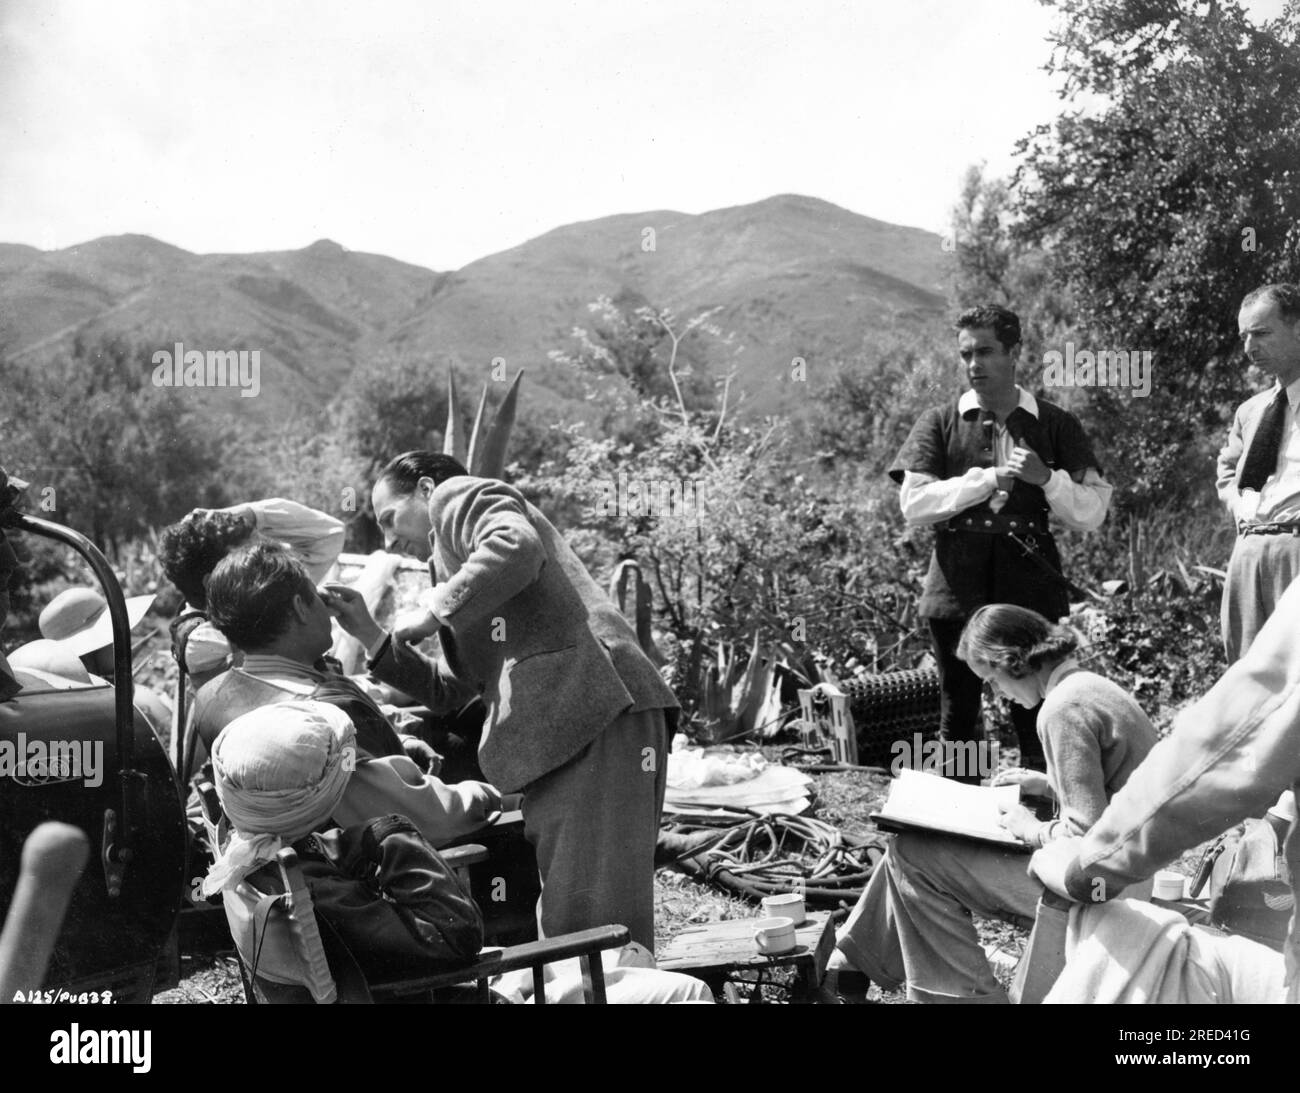 JACK HAWKINS ORSON WELLES (having his makeup touched up) CECILE AUBRY and TYRONE POWER on set location candid in Morocco during filming of THE BLACK ROSE 1950 director HENRY HATHAWAY novel Thomas B. Costain screenplay Talbot Jennings music Richard Addinsell cinematography Jack Cardiff costumes Michael Whittaker Twentieth Century Fox Stock Photo